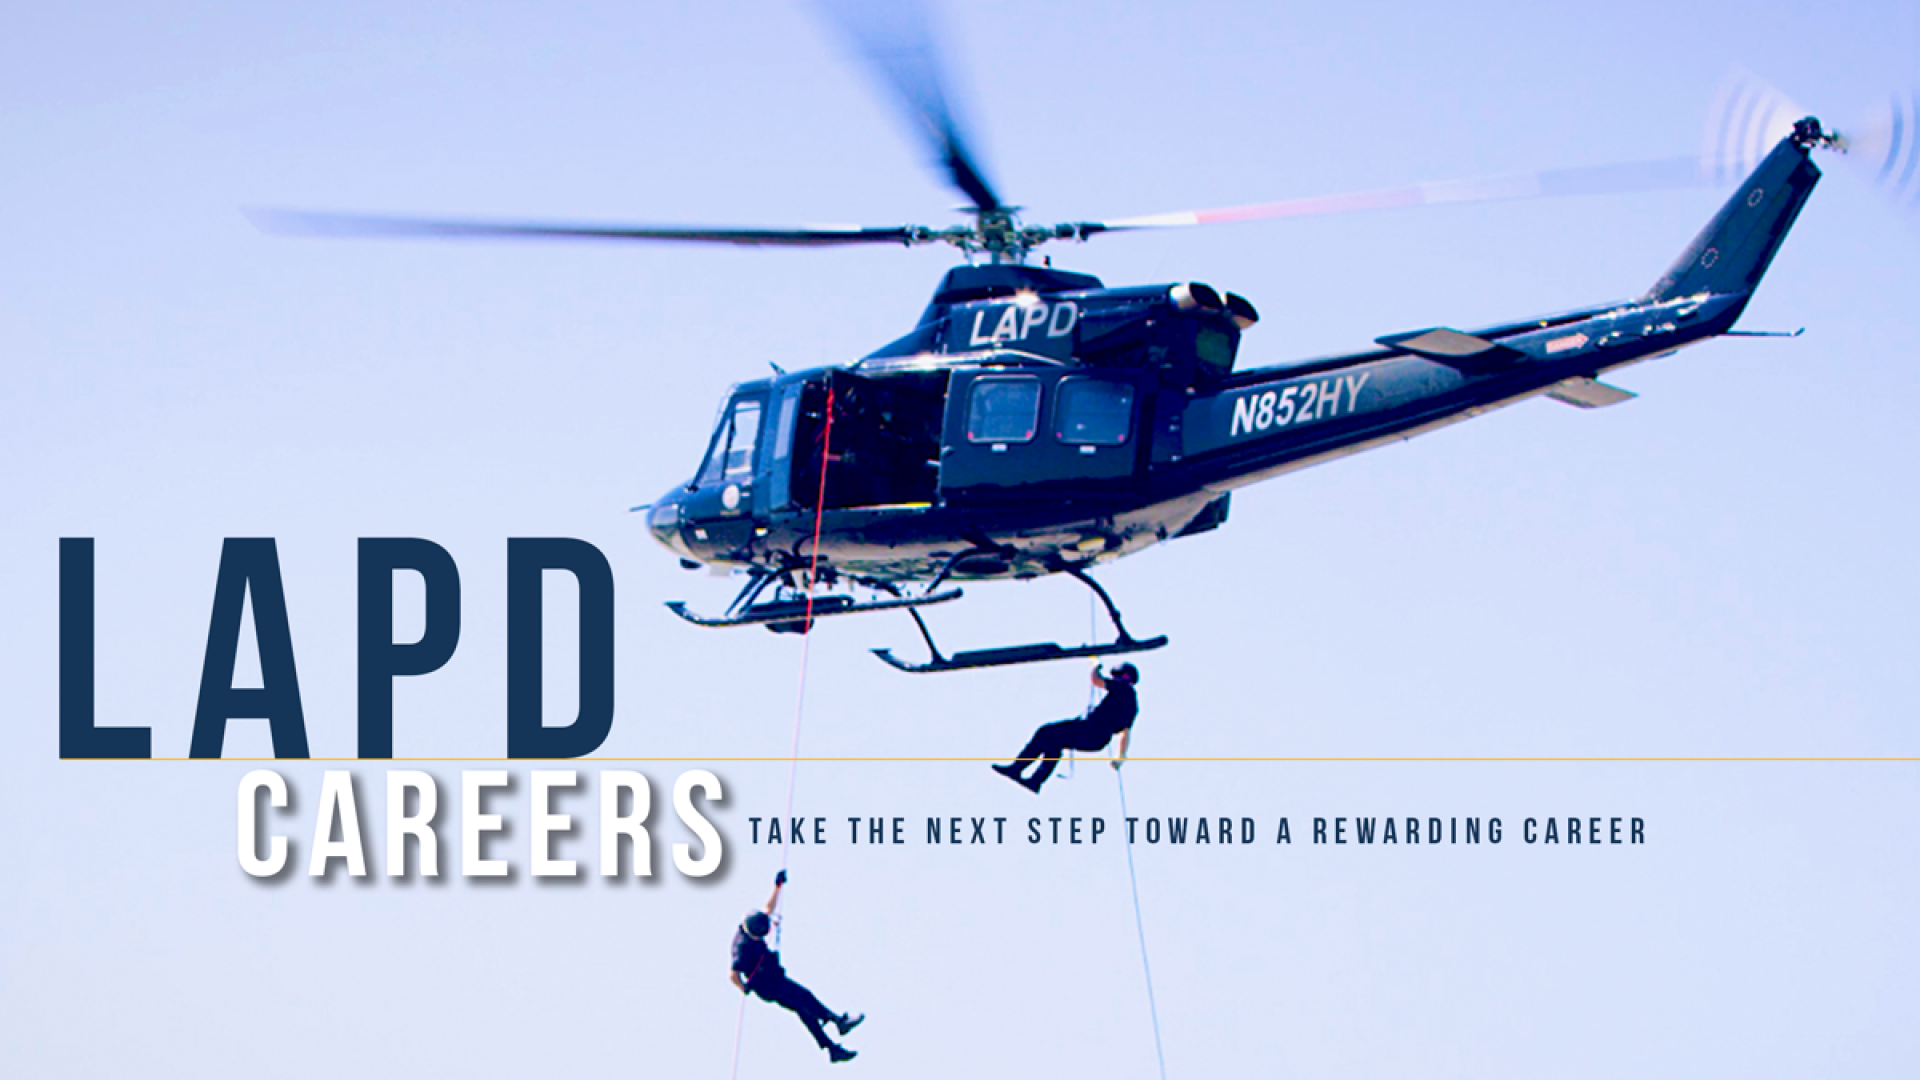 Metro Jumping Out Of Helicopter - Lapd Helicopter , HD Wallpaper & Backgrounds